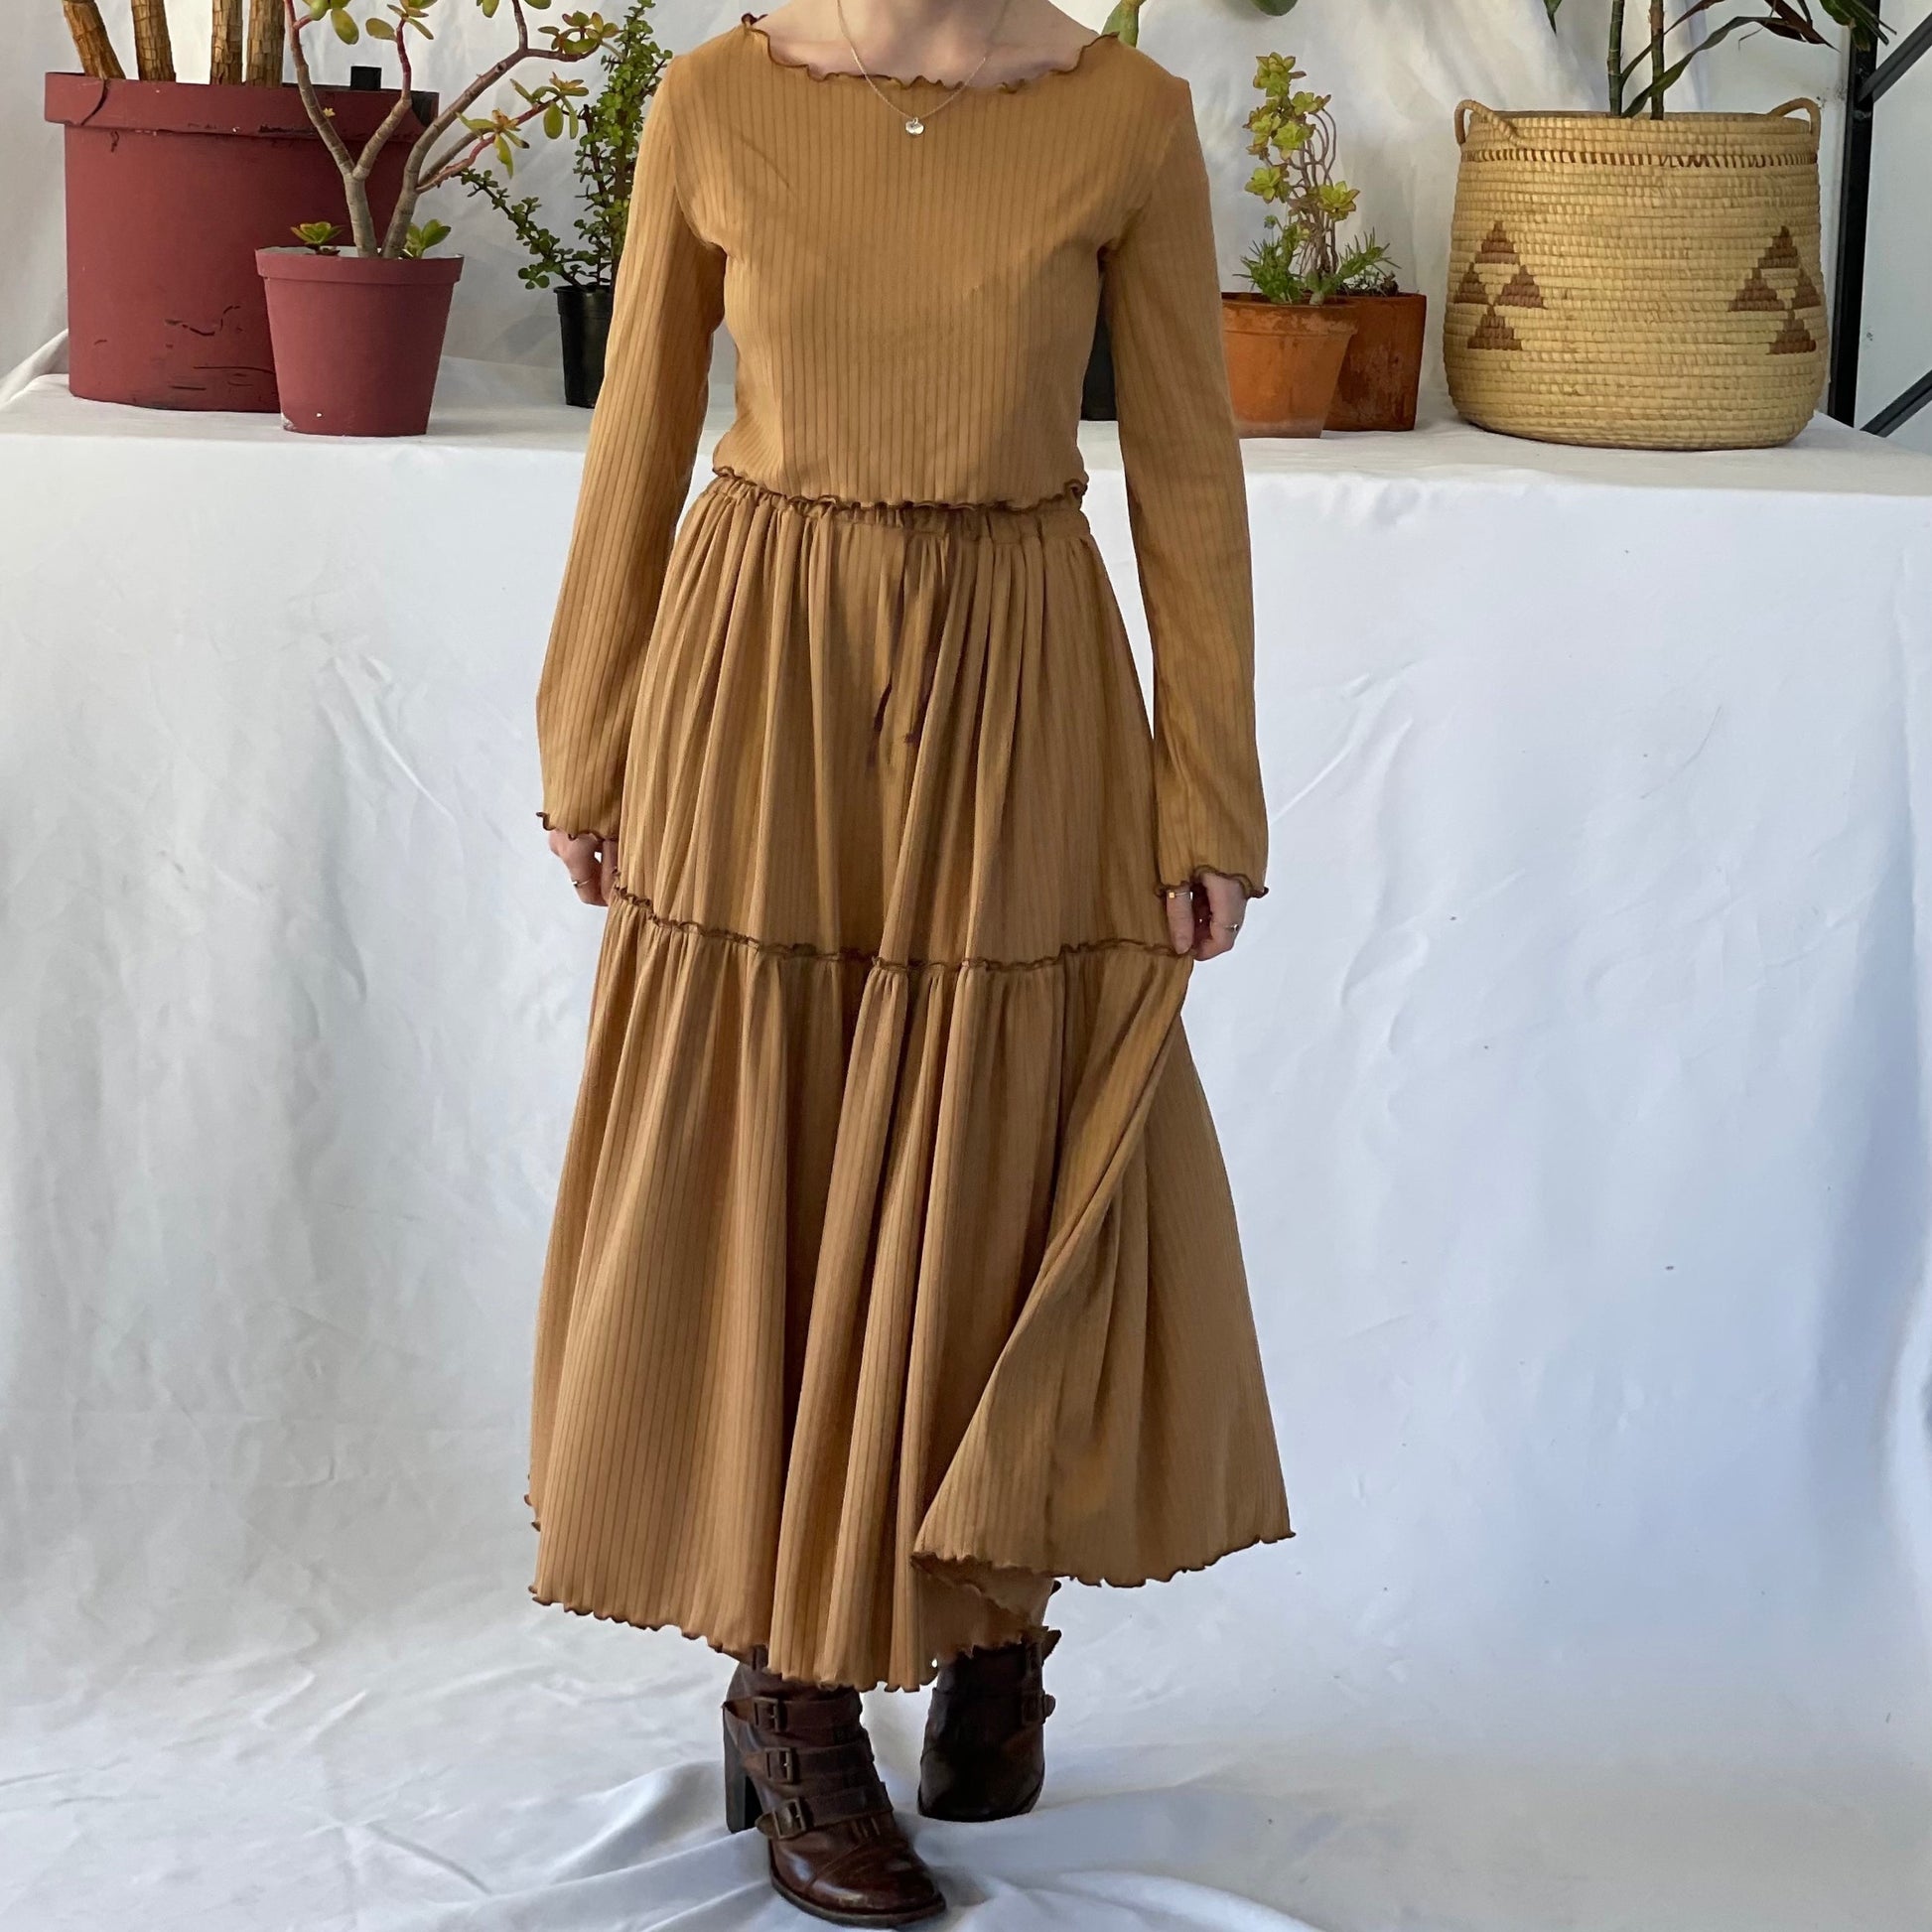 Model wears matching skirt and top set with brown boots. The model stands in front of a white backdrop with pot plants. 